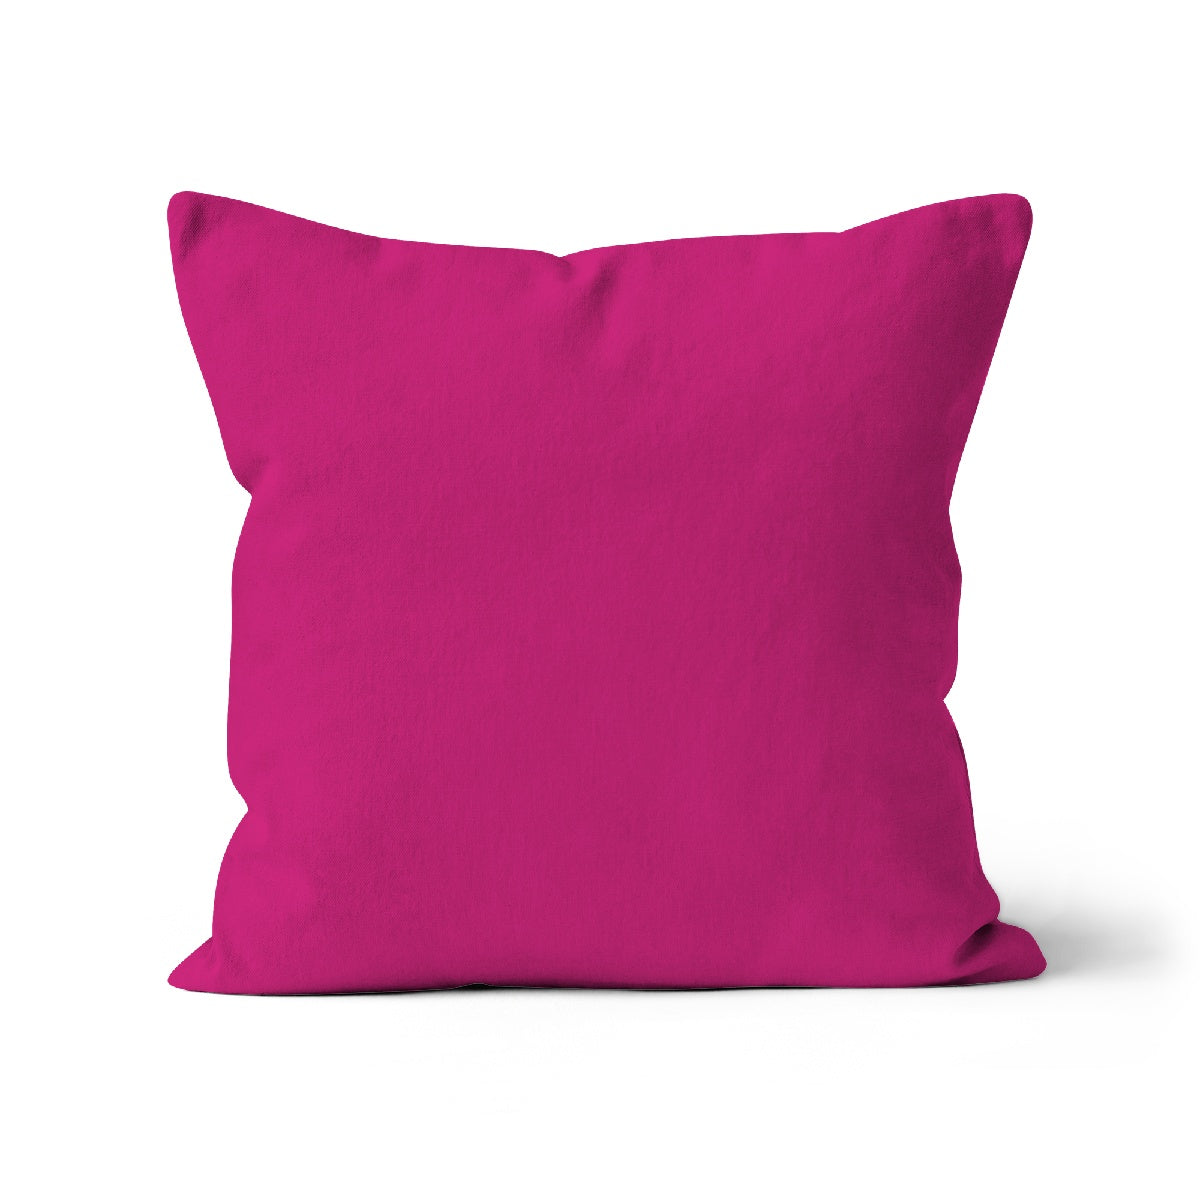 Free shipping. Bright pink cushion cover. 100% organic cotton. Organic Homeware. Scatter cushion covers. Square pink pillow cushion cover. Printed both sides. Double-sided colour. Machine washable cushion covers, hot pink cushion cover.